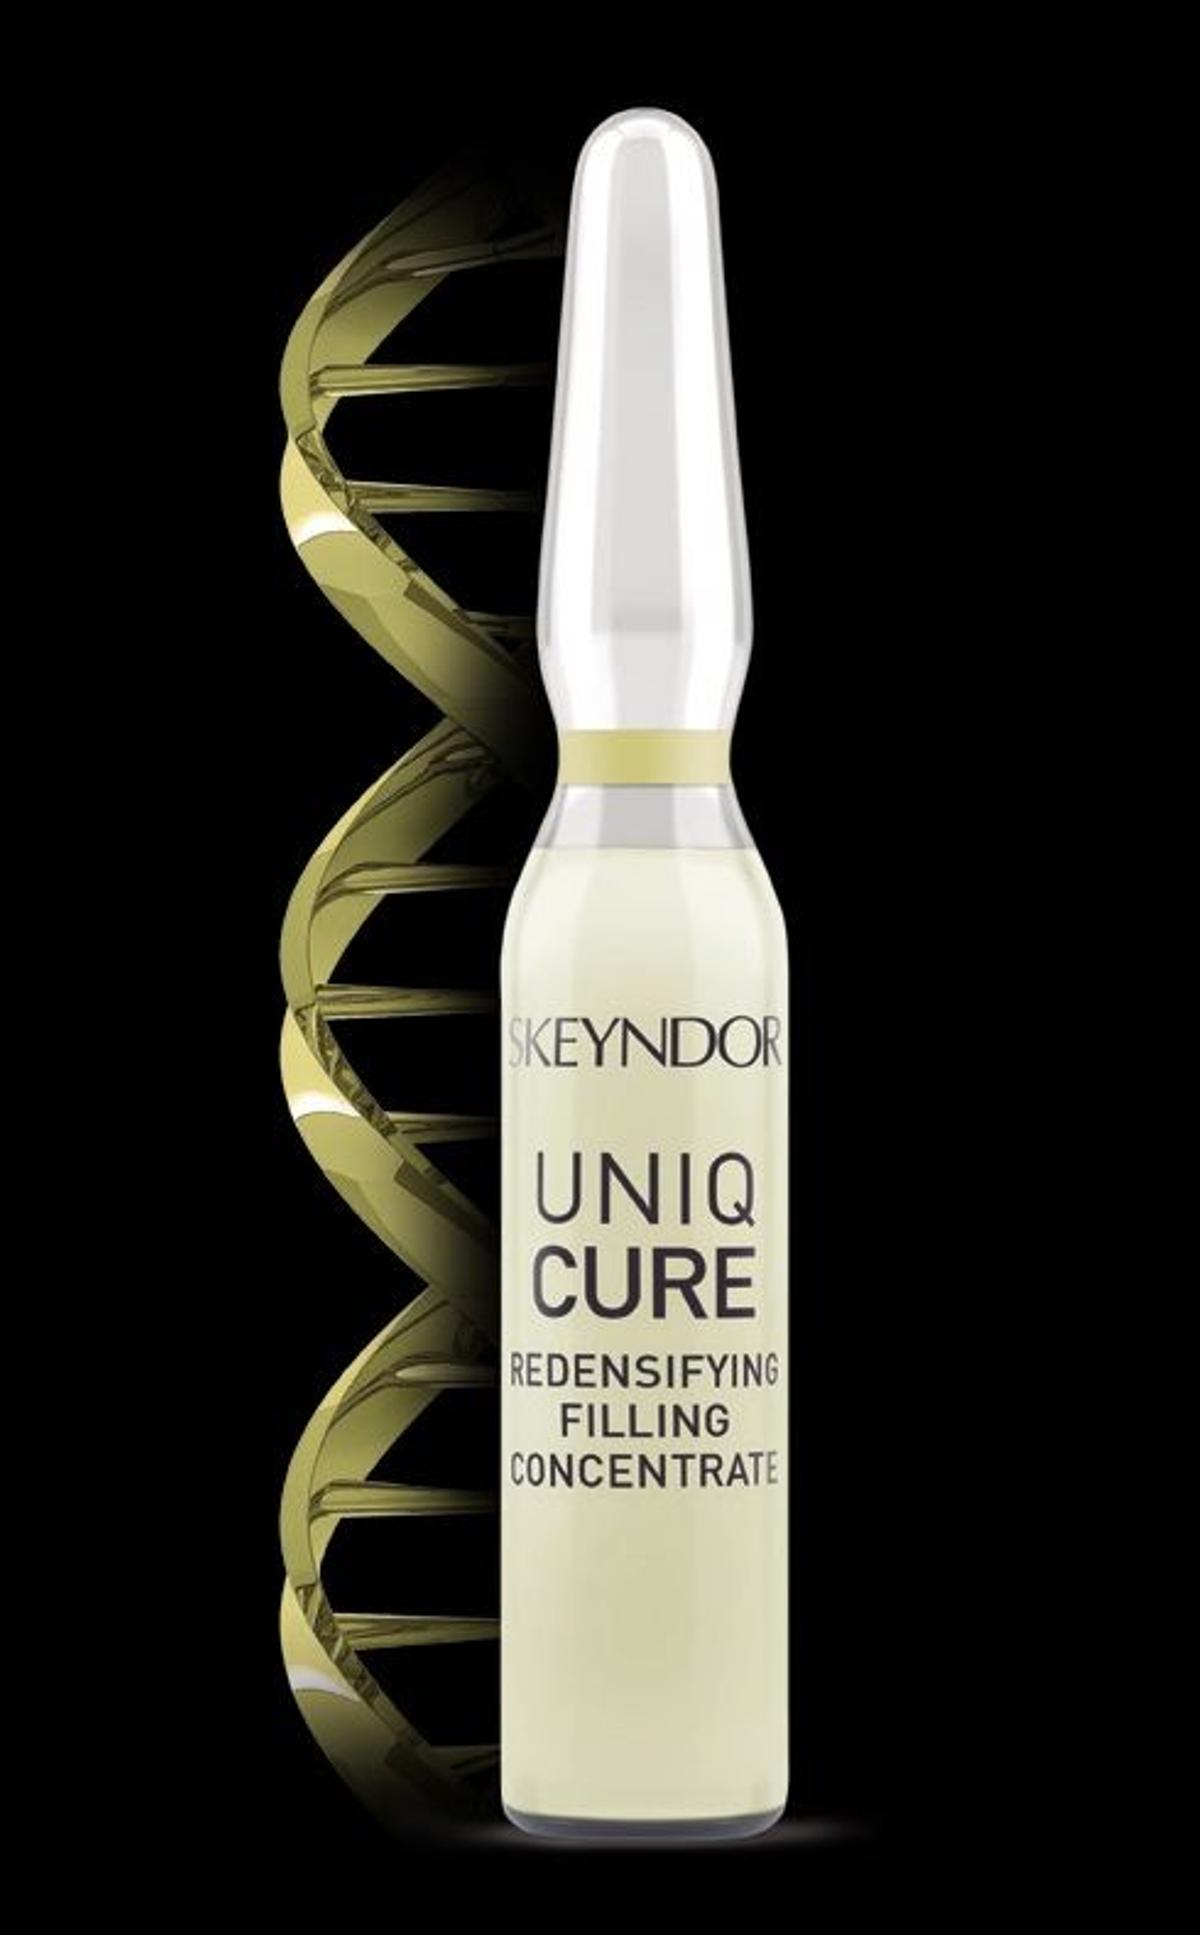 Uniqcure - Redensifying Filling Concentrate